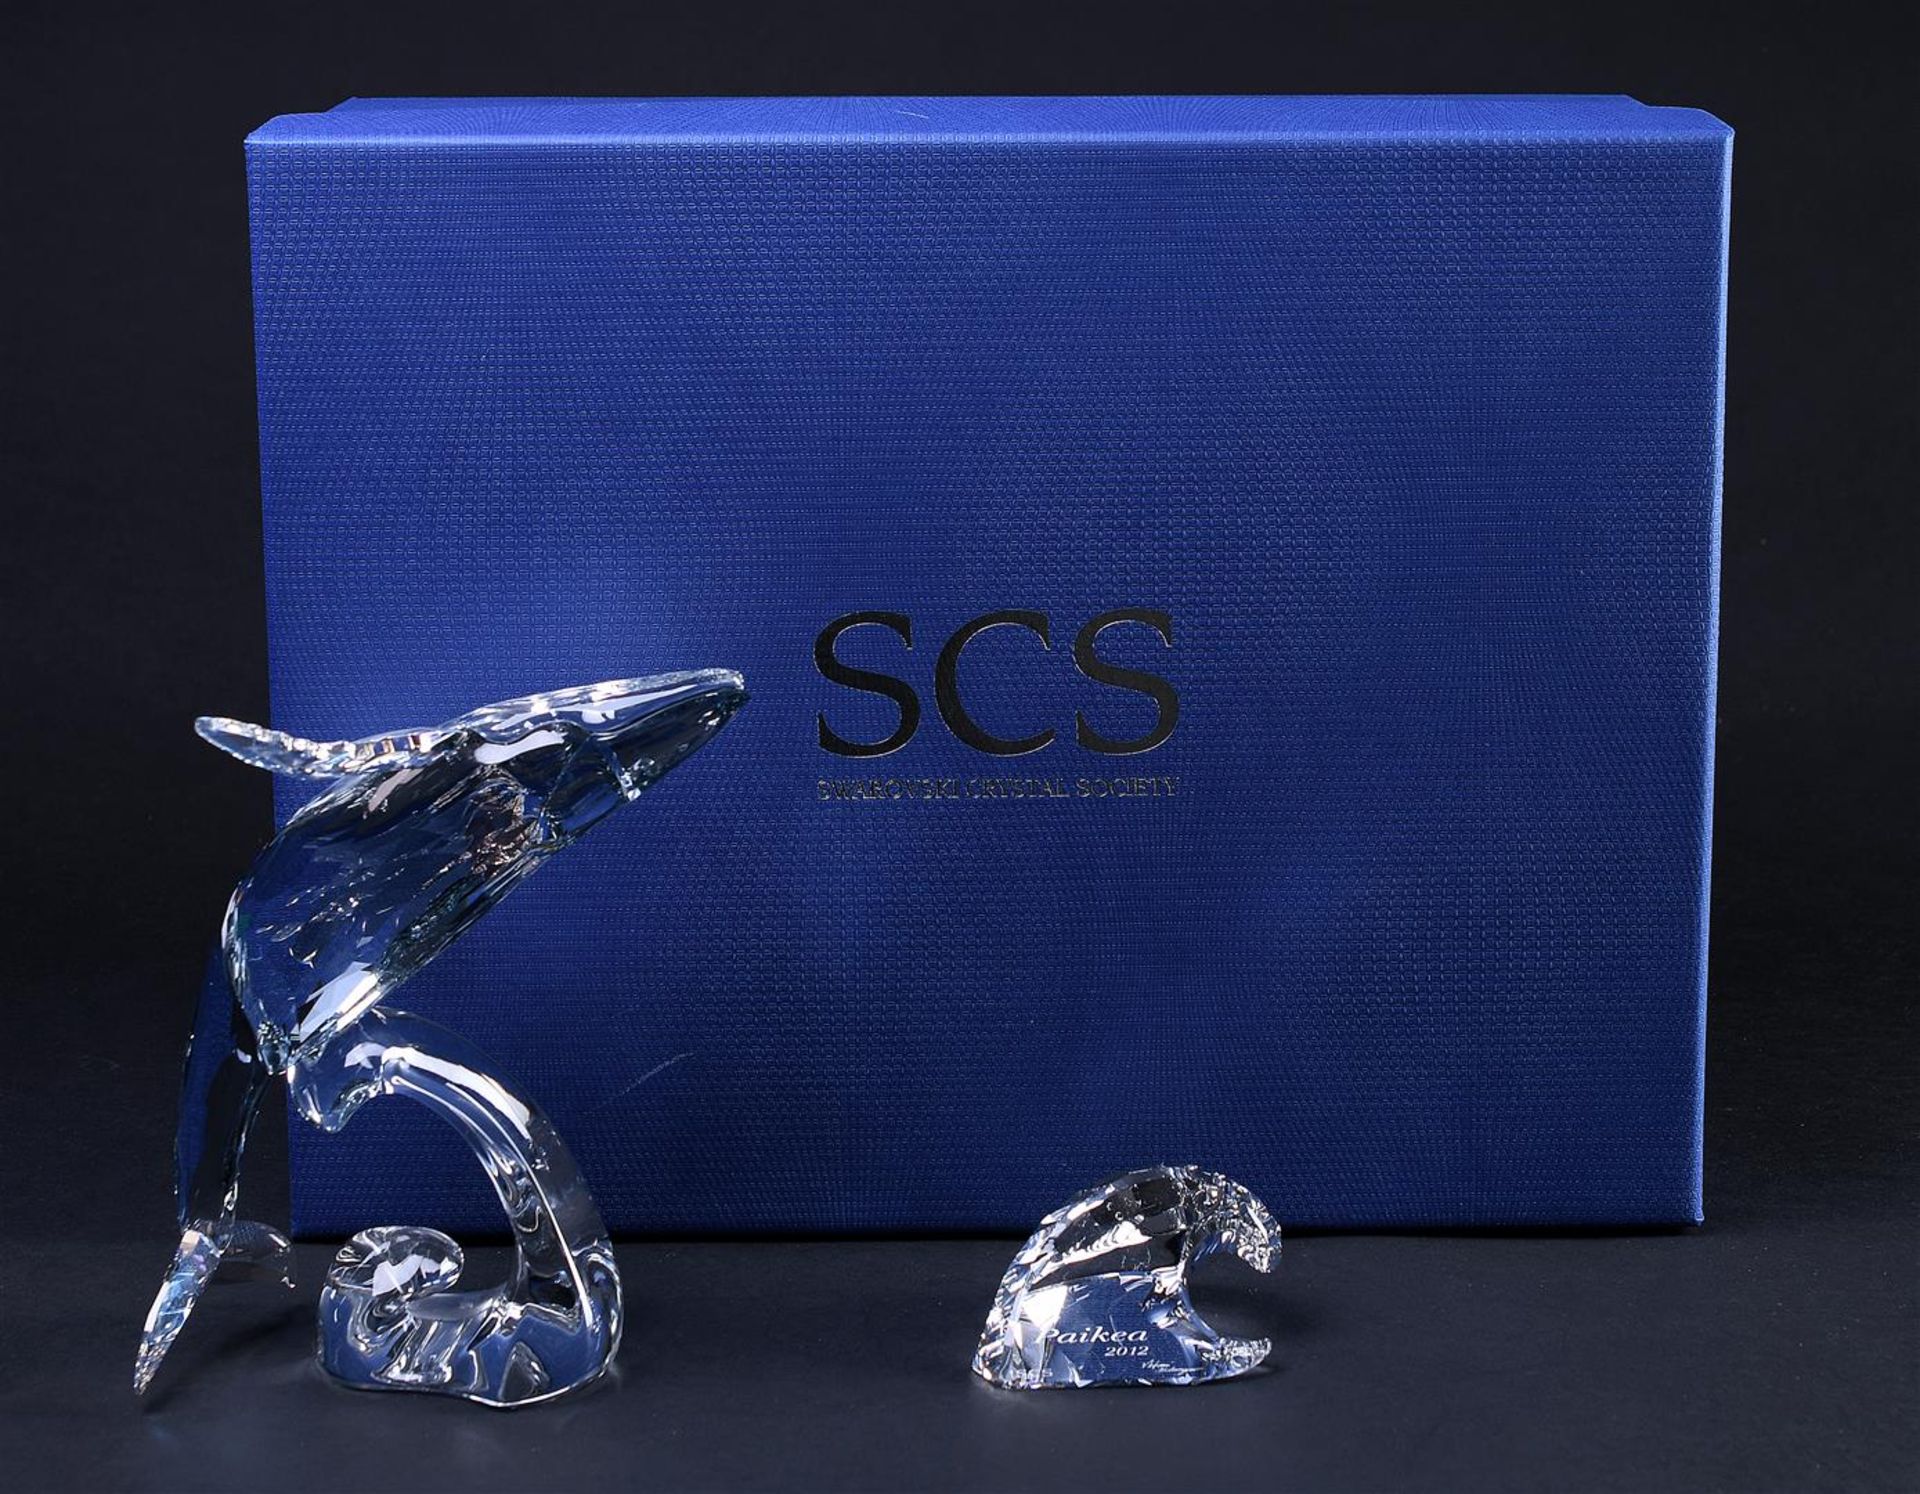 Swarovski SCS, Annual Edition 2012 - Paikea Walvis Year of issue 2012, 1095228. Includes original bo - Image 5 of 5